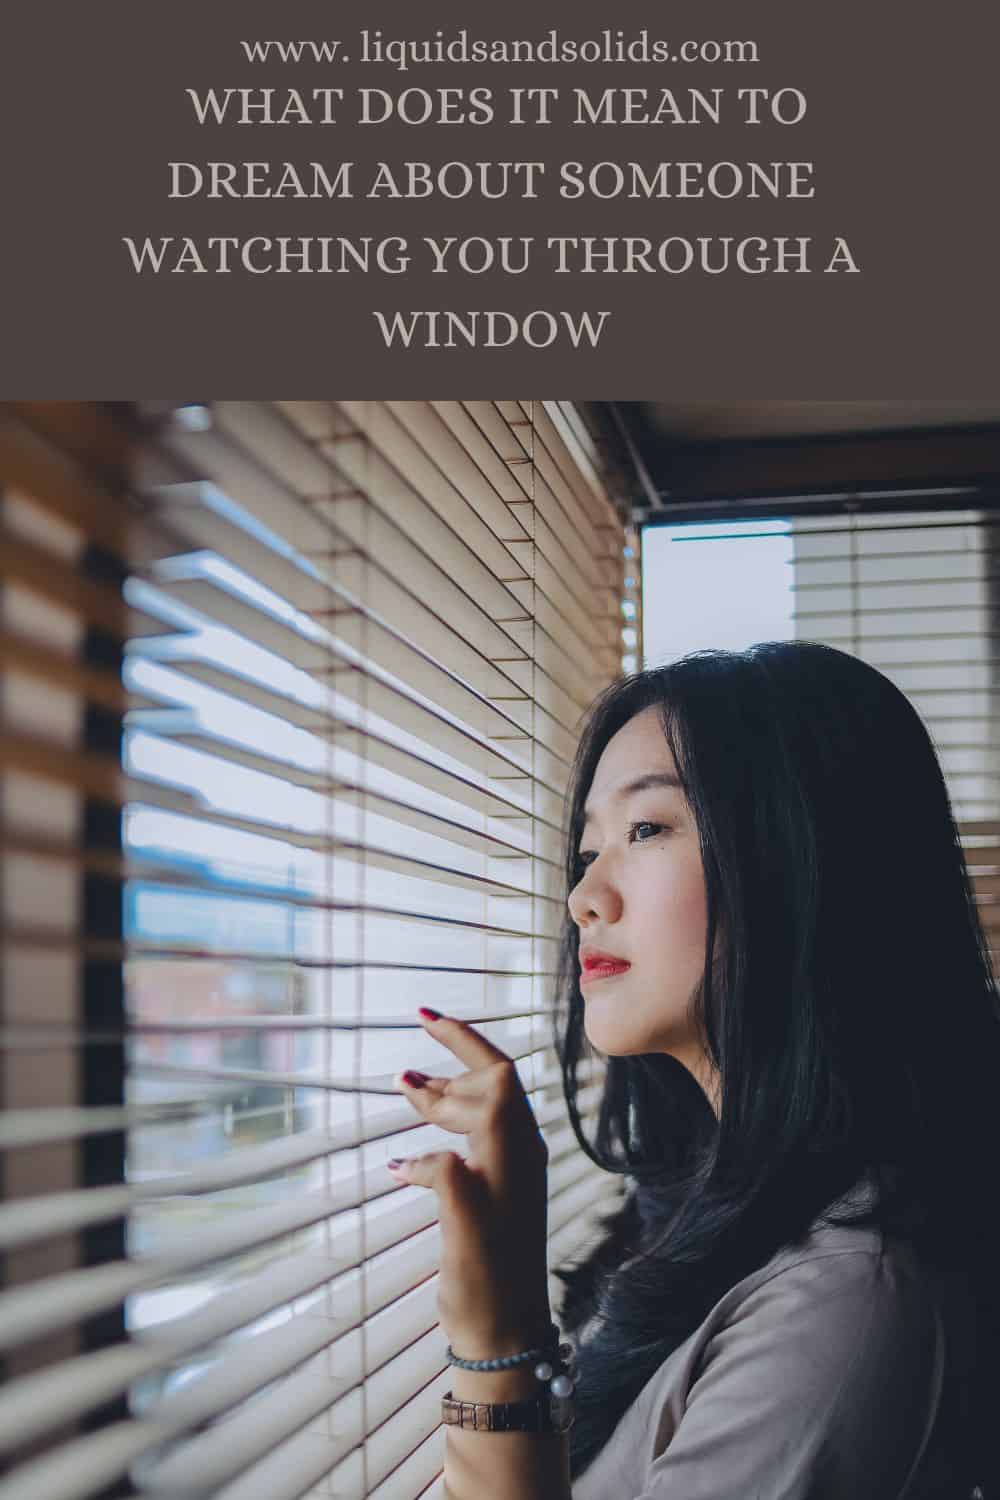  What Does It Mean To Dream About Someone Watching You Through A Window